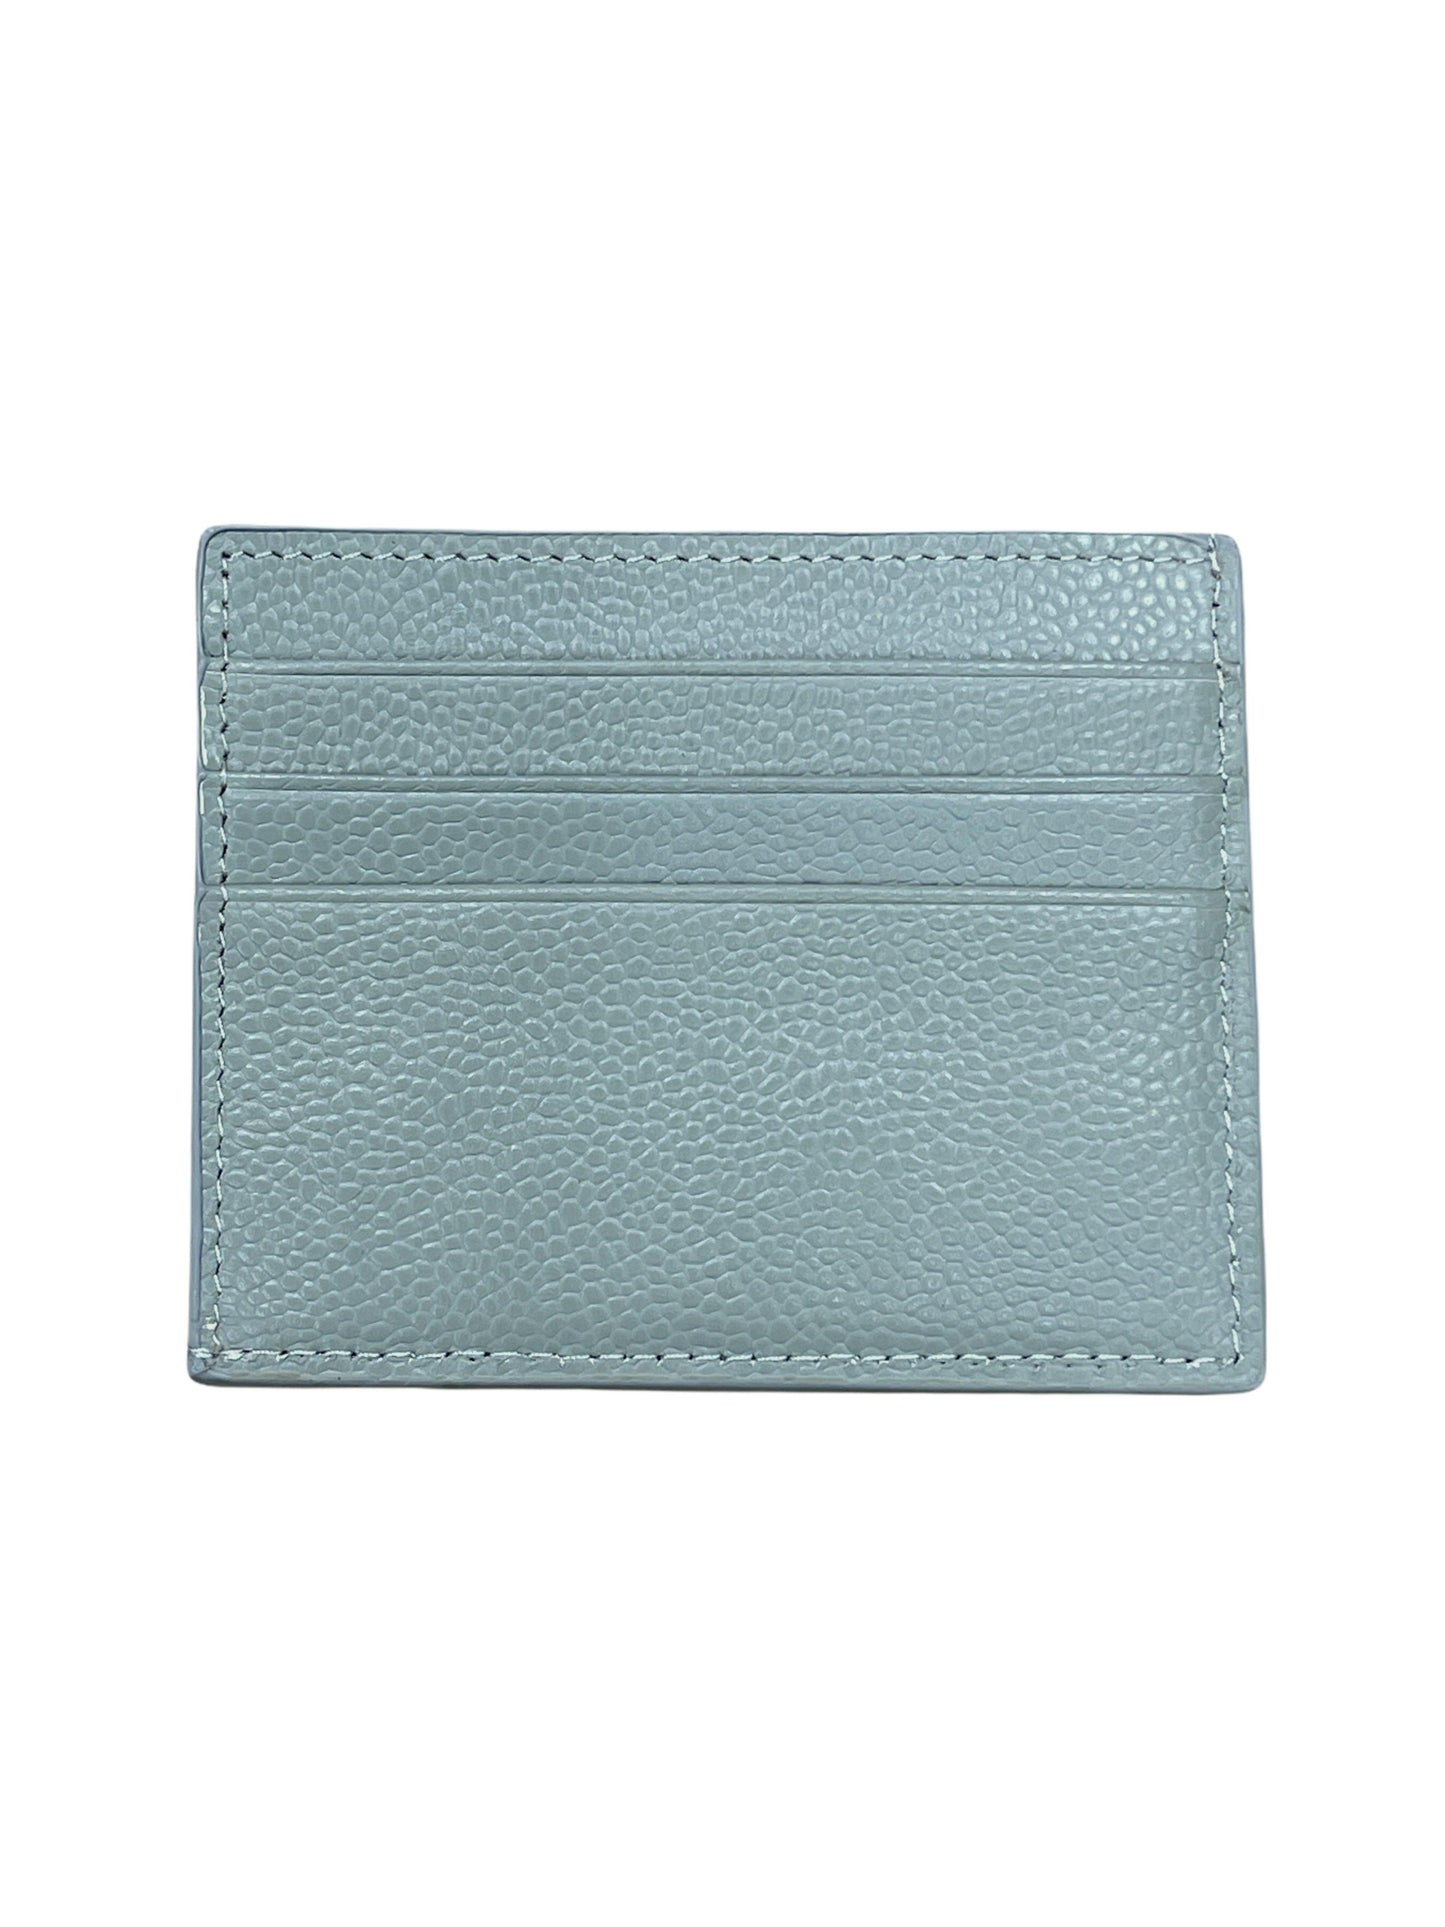 Thom Browne Grey Pebbled Leather Card Holder Wallet. Genuine Design luxury consignment